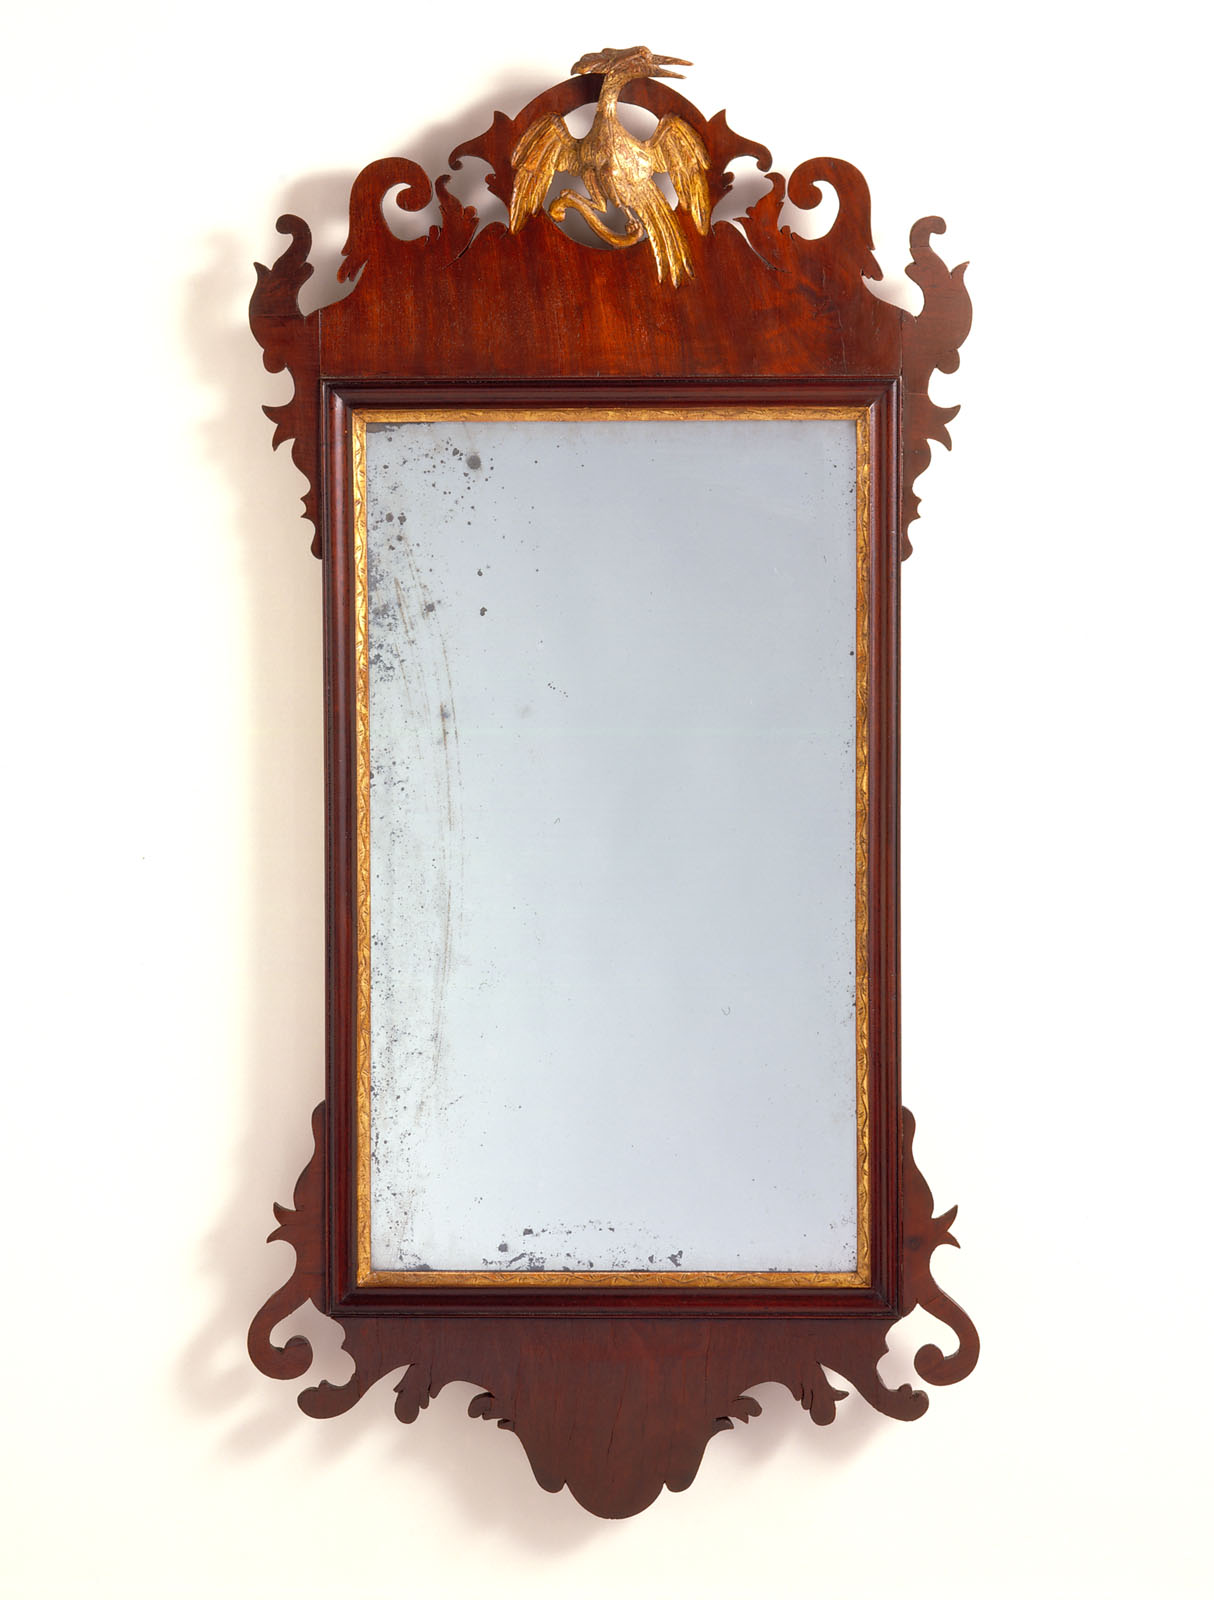 Furniture - Looking glass or mirror